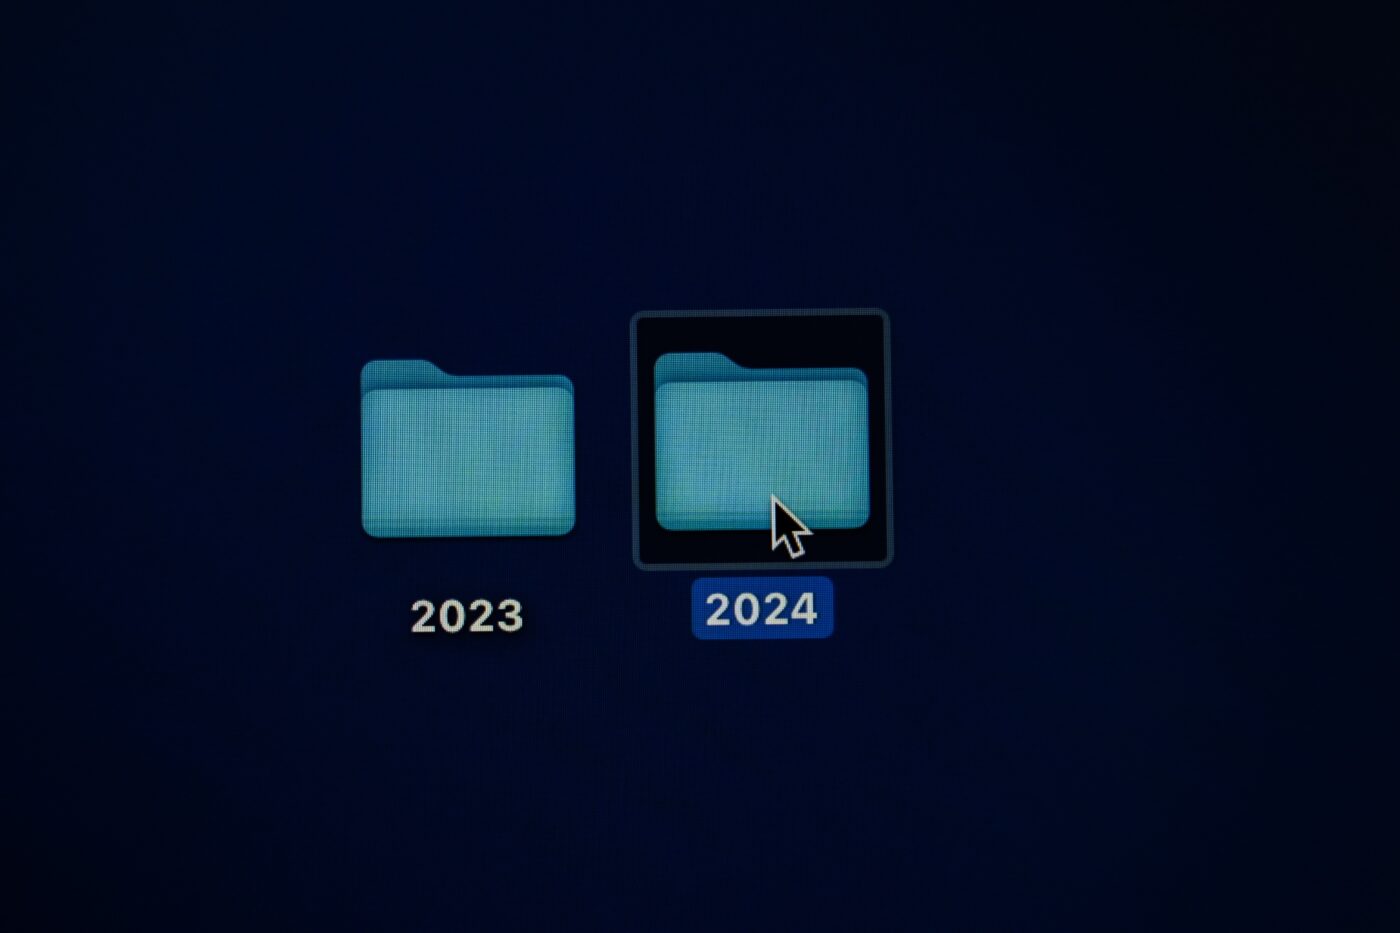 Computer screen with two files named '2023' and '2024'